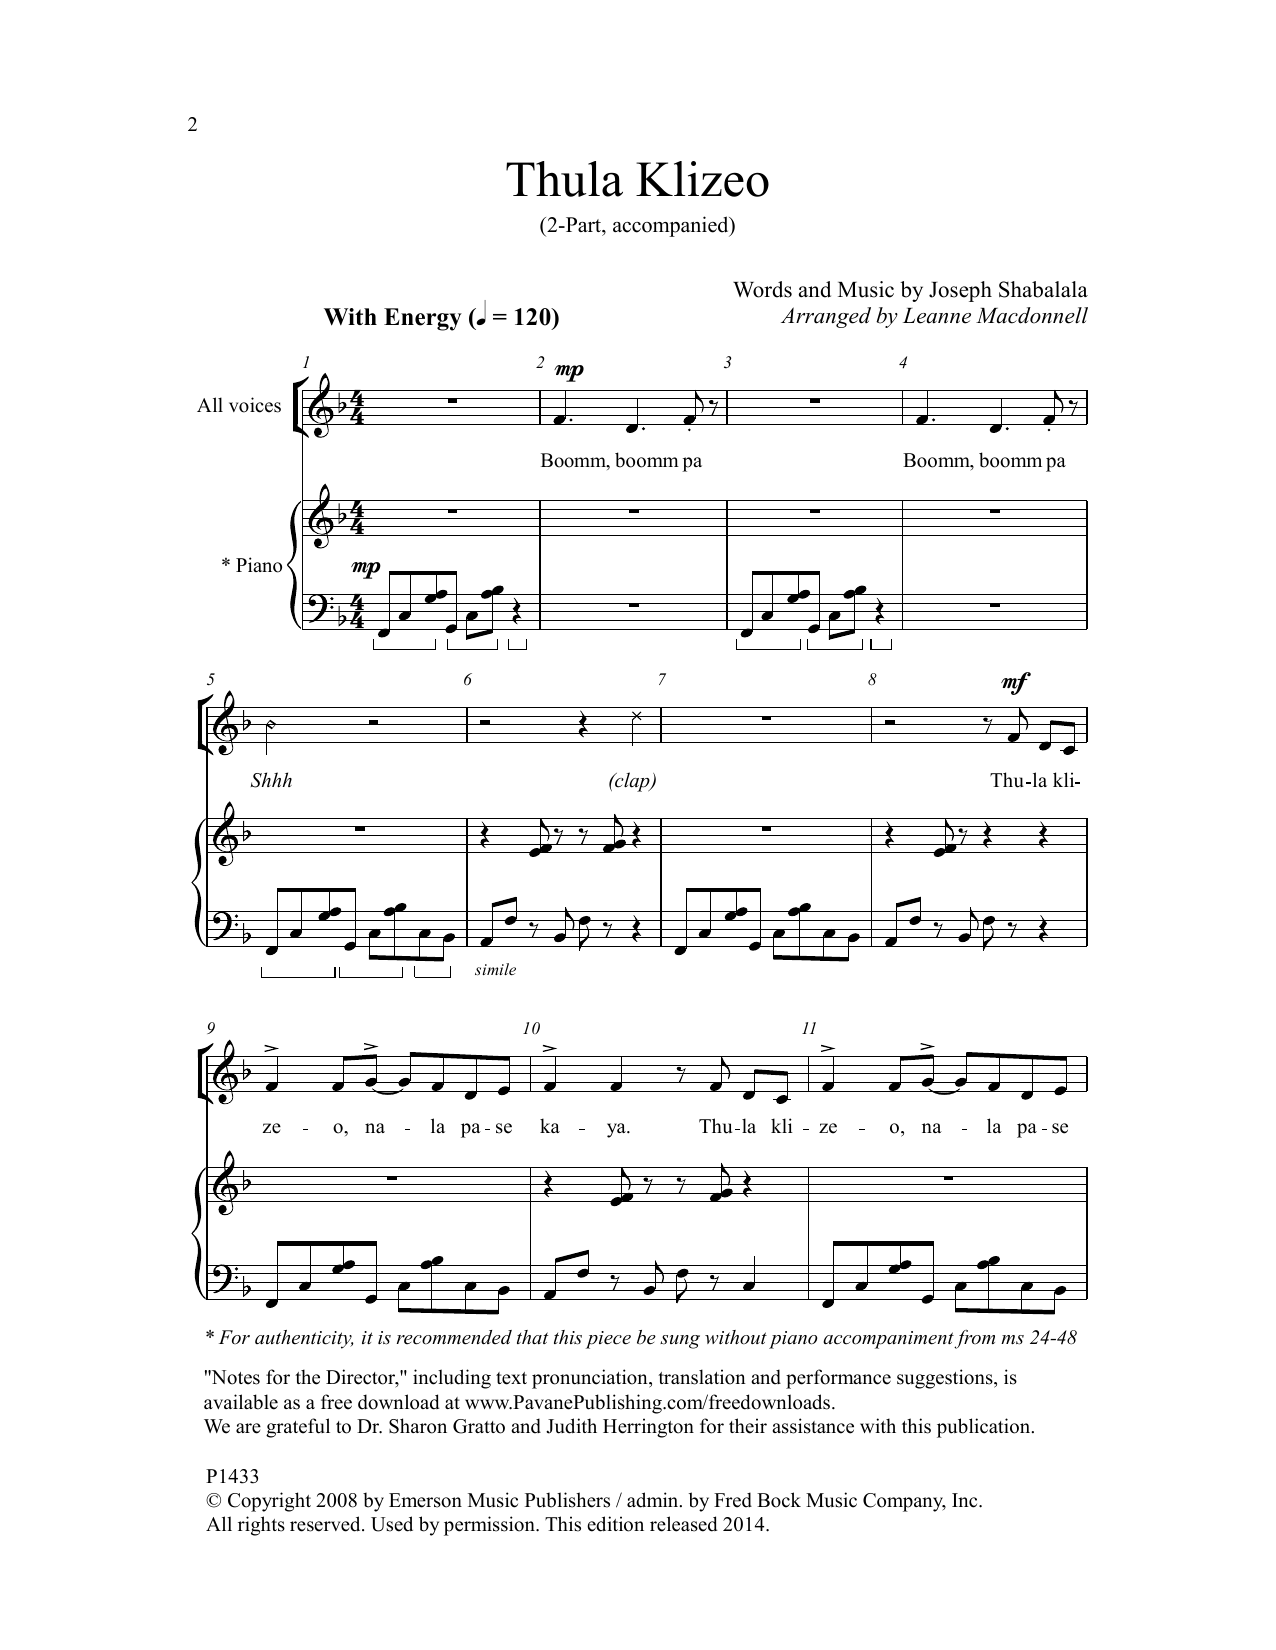 Download Leanne Macdonnell Thula Klizeo Sheet Music